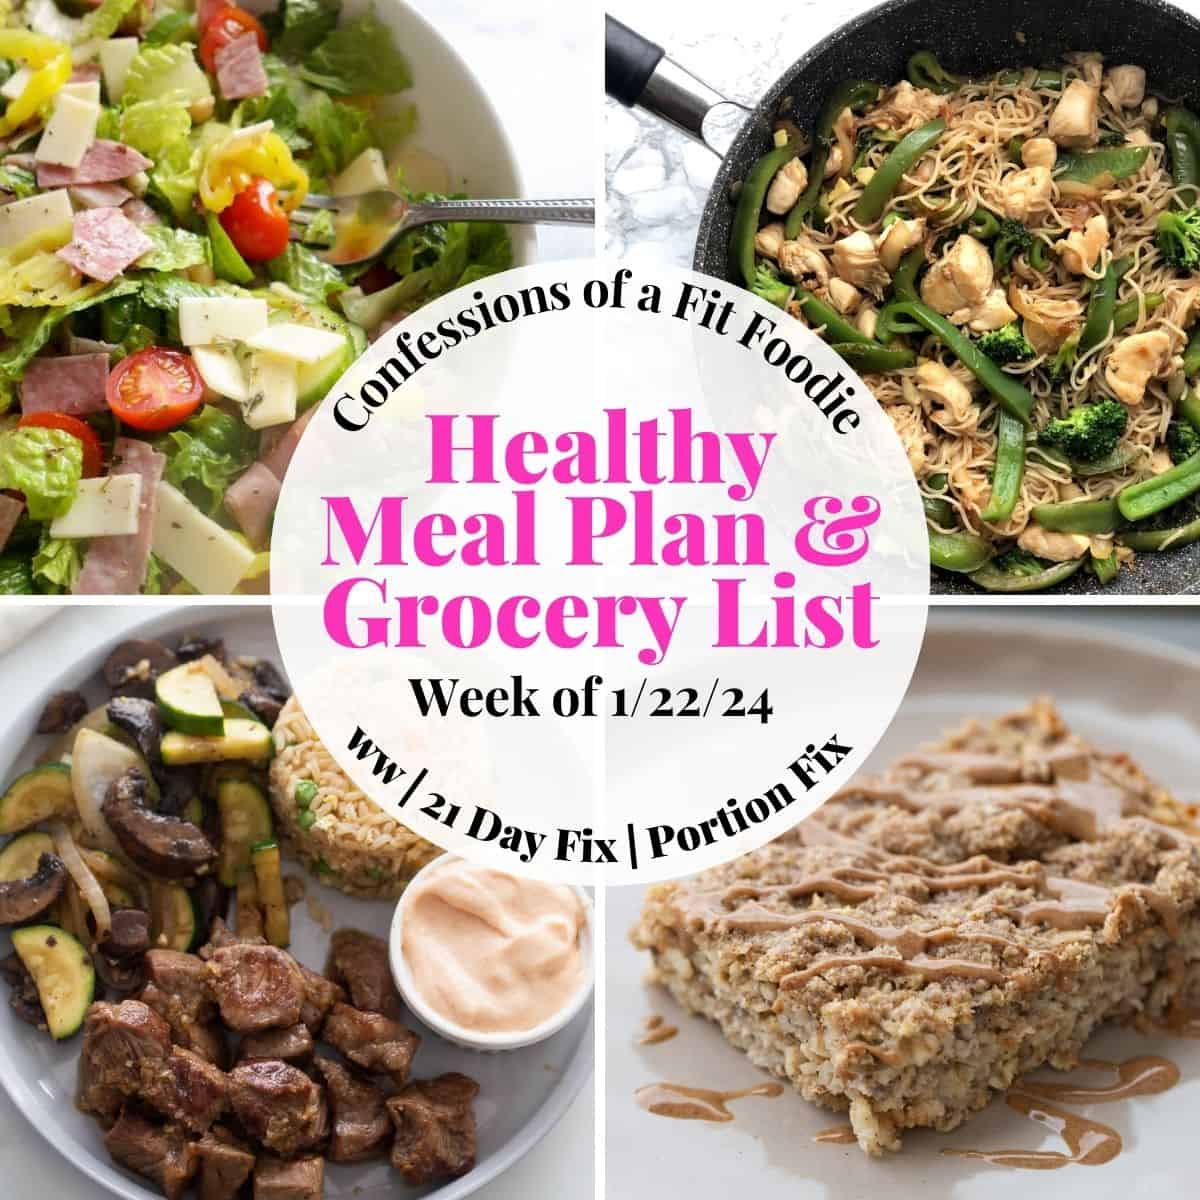 Food photo collage with pink and black text on a white circle. Text says, "Healthy Meal Plan and Grocery List Week of 1/22/24"